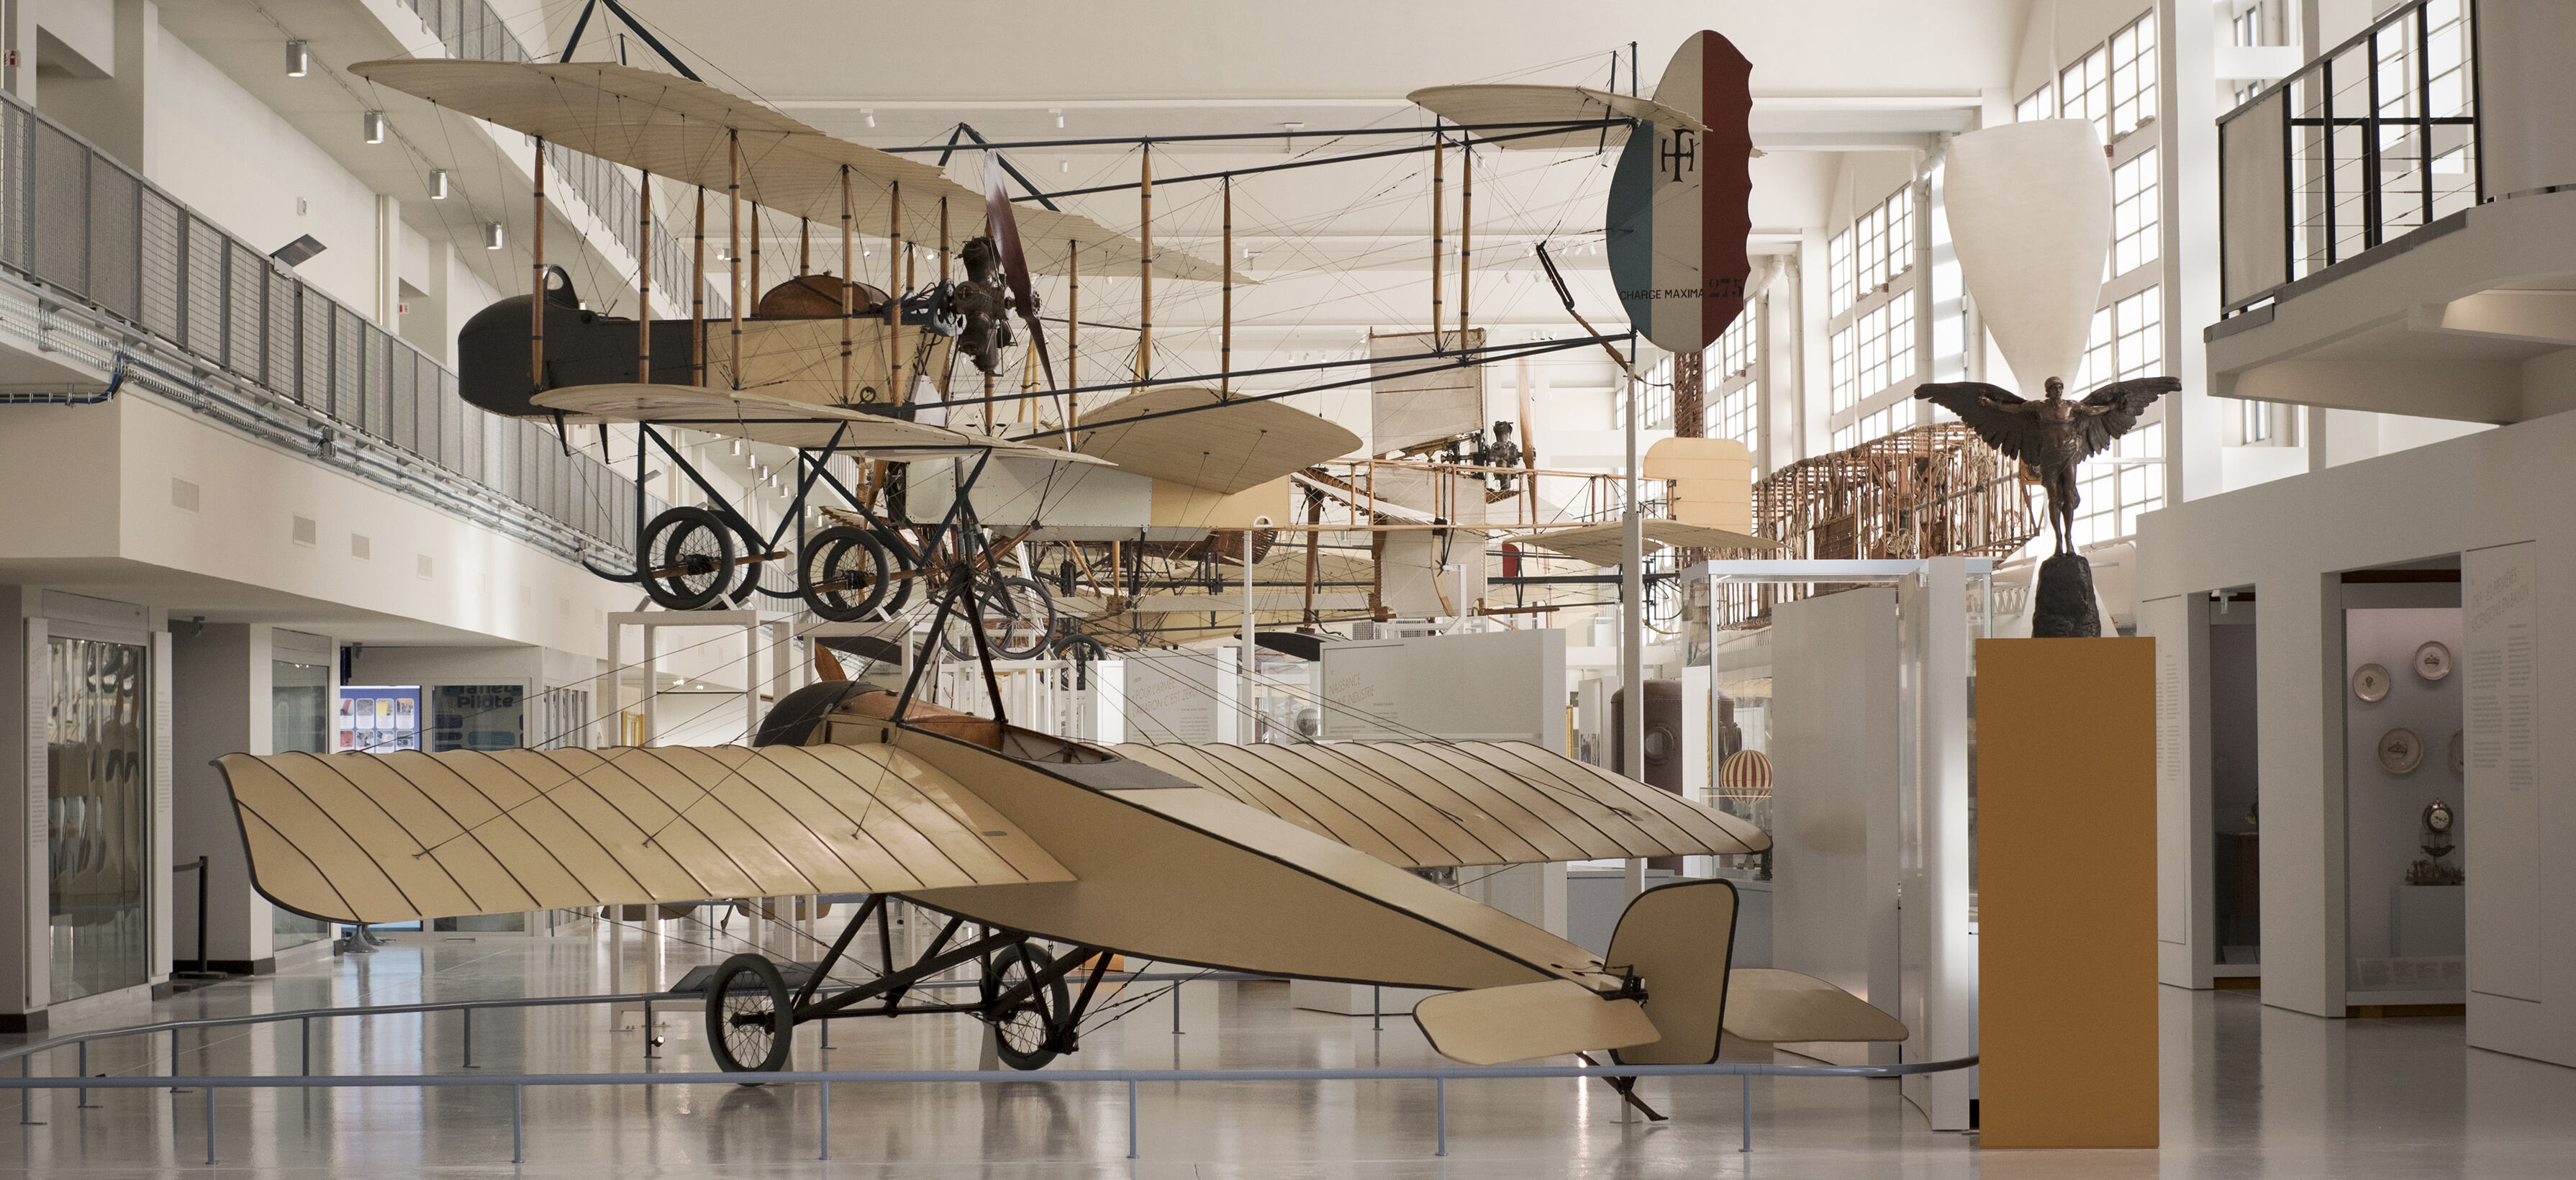 News - The National Air and Space Museum of France